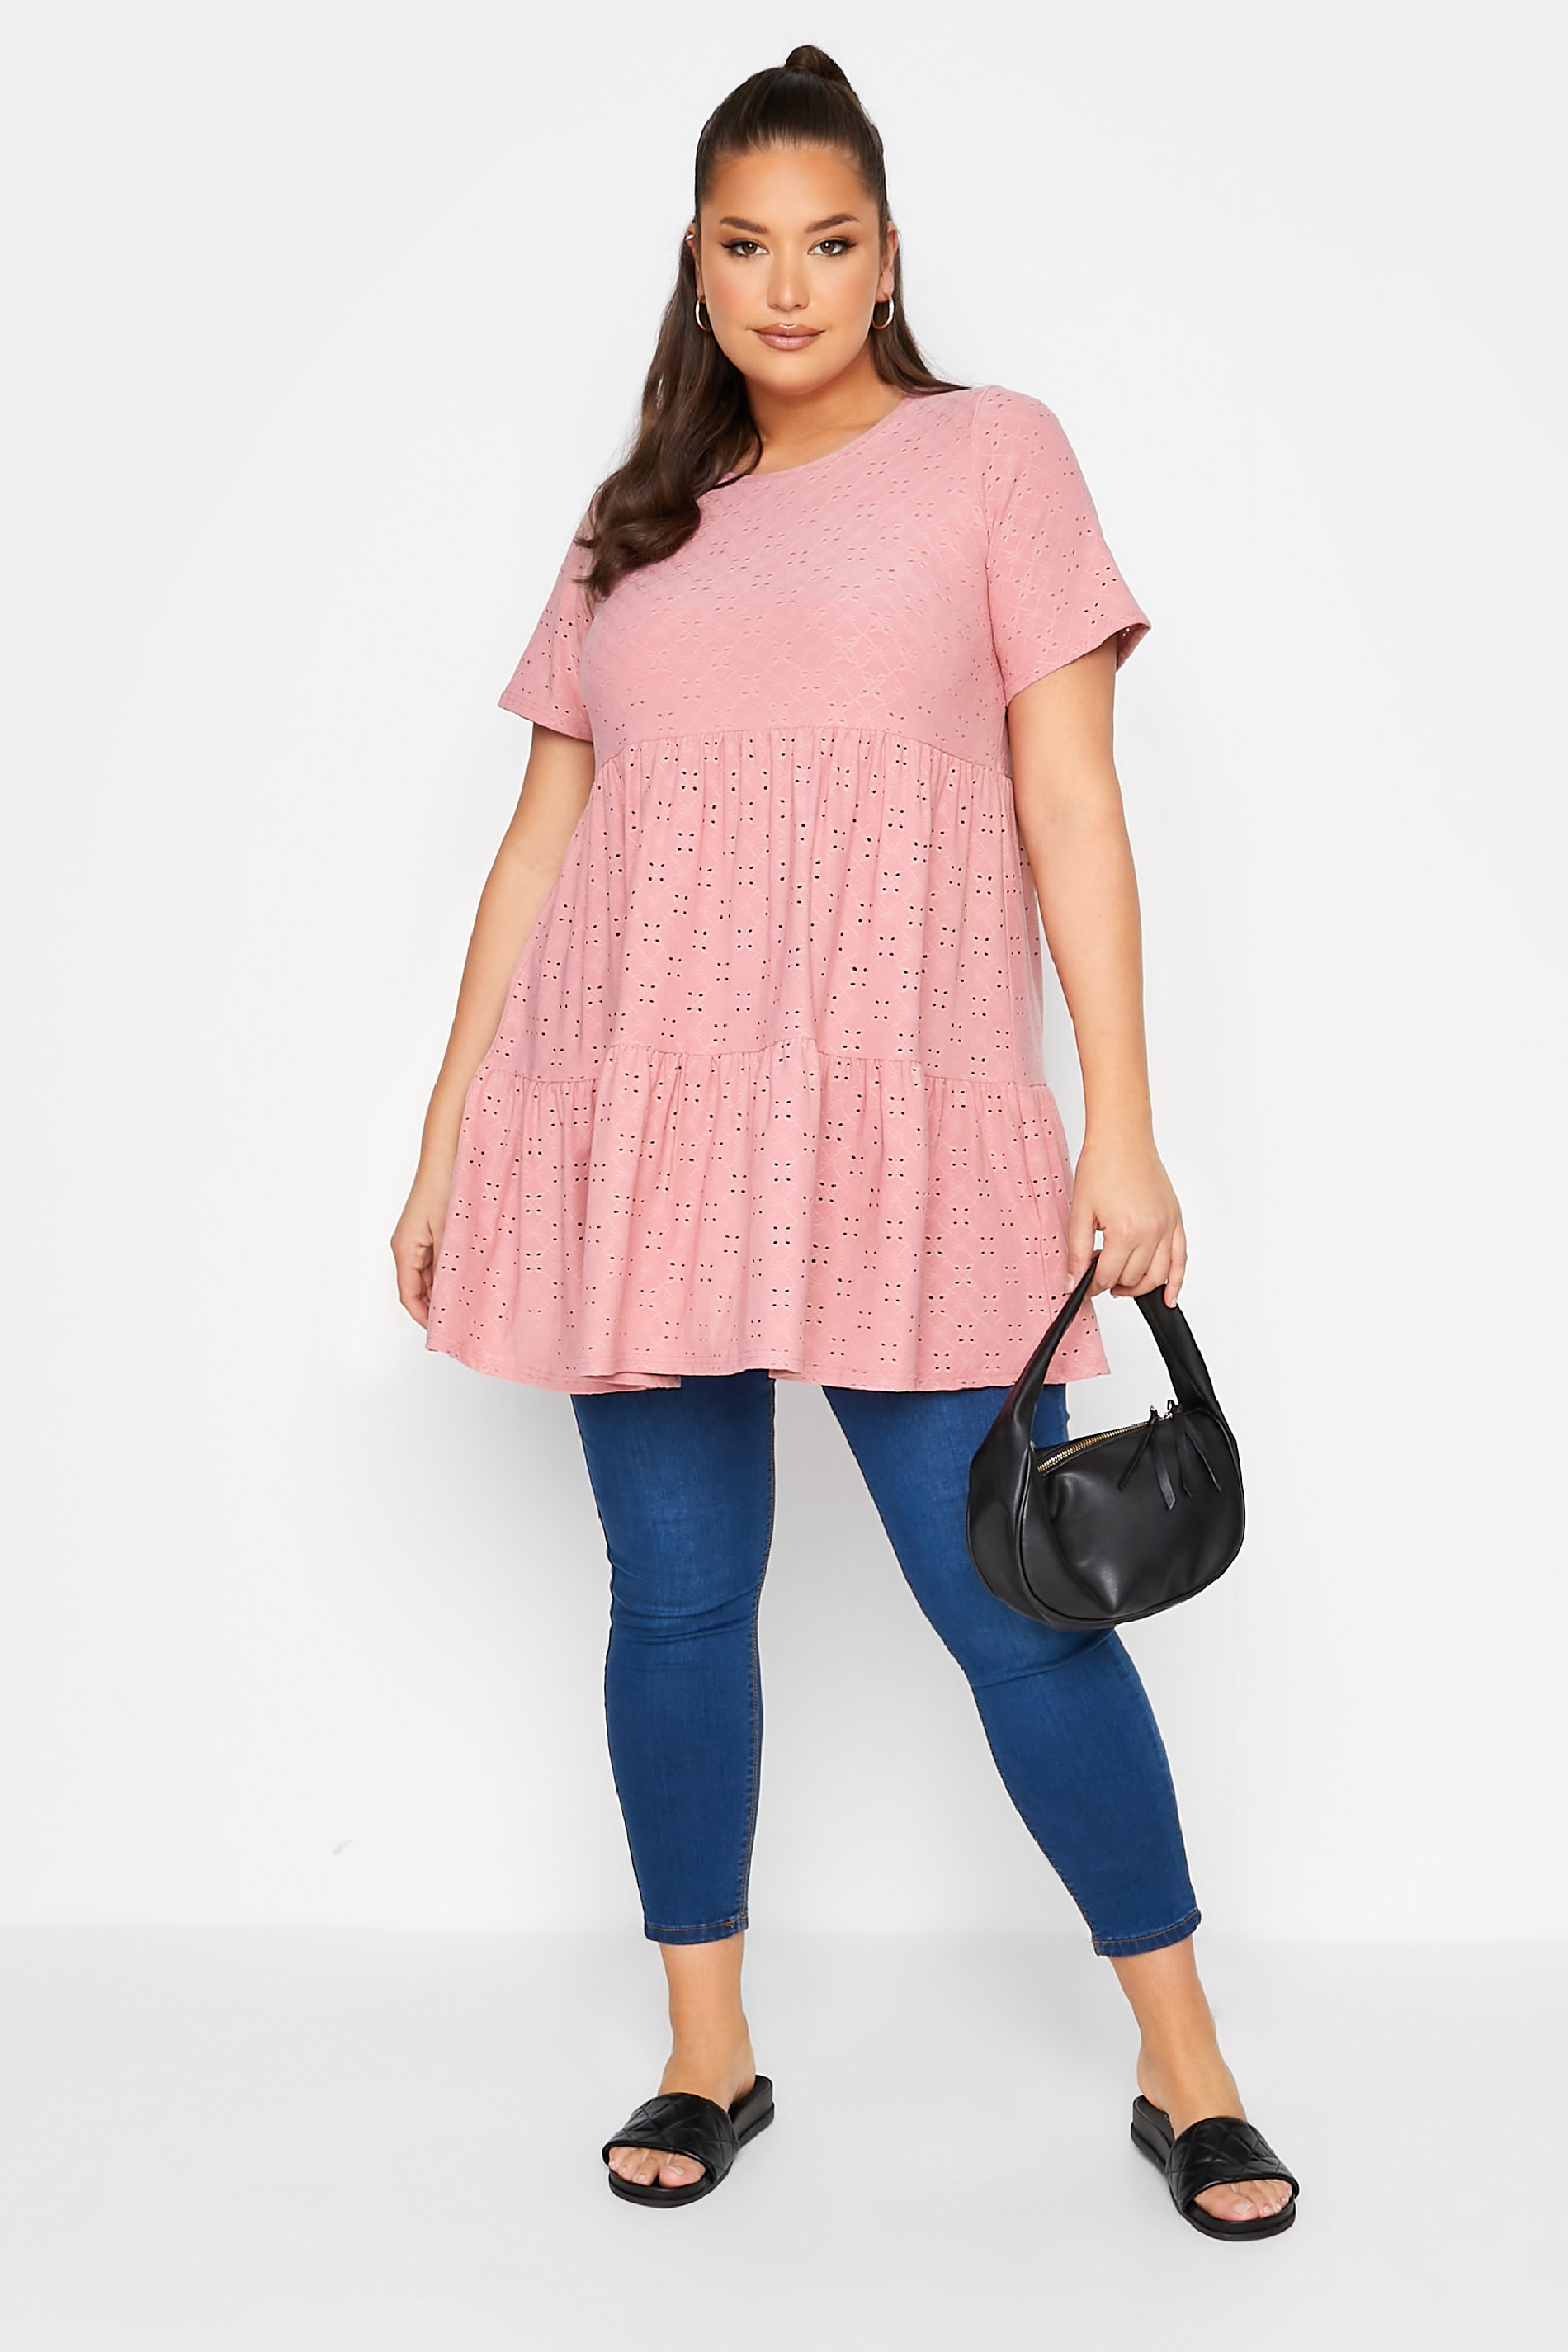 Grande taille  Tops Grande taille  Tops dÉté | LIMITED COLLECTION - Top Rose Smocké Broderie Anglaise - BX09332